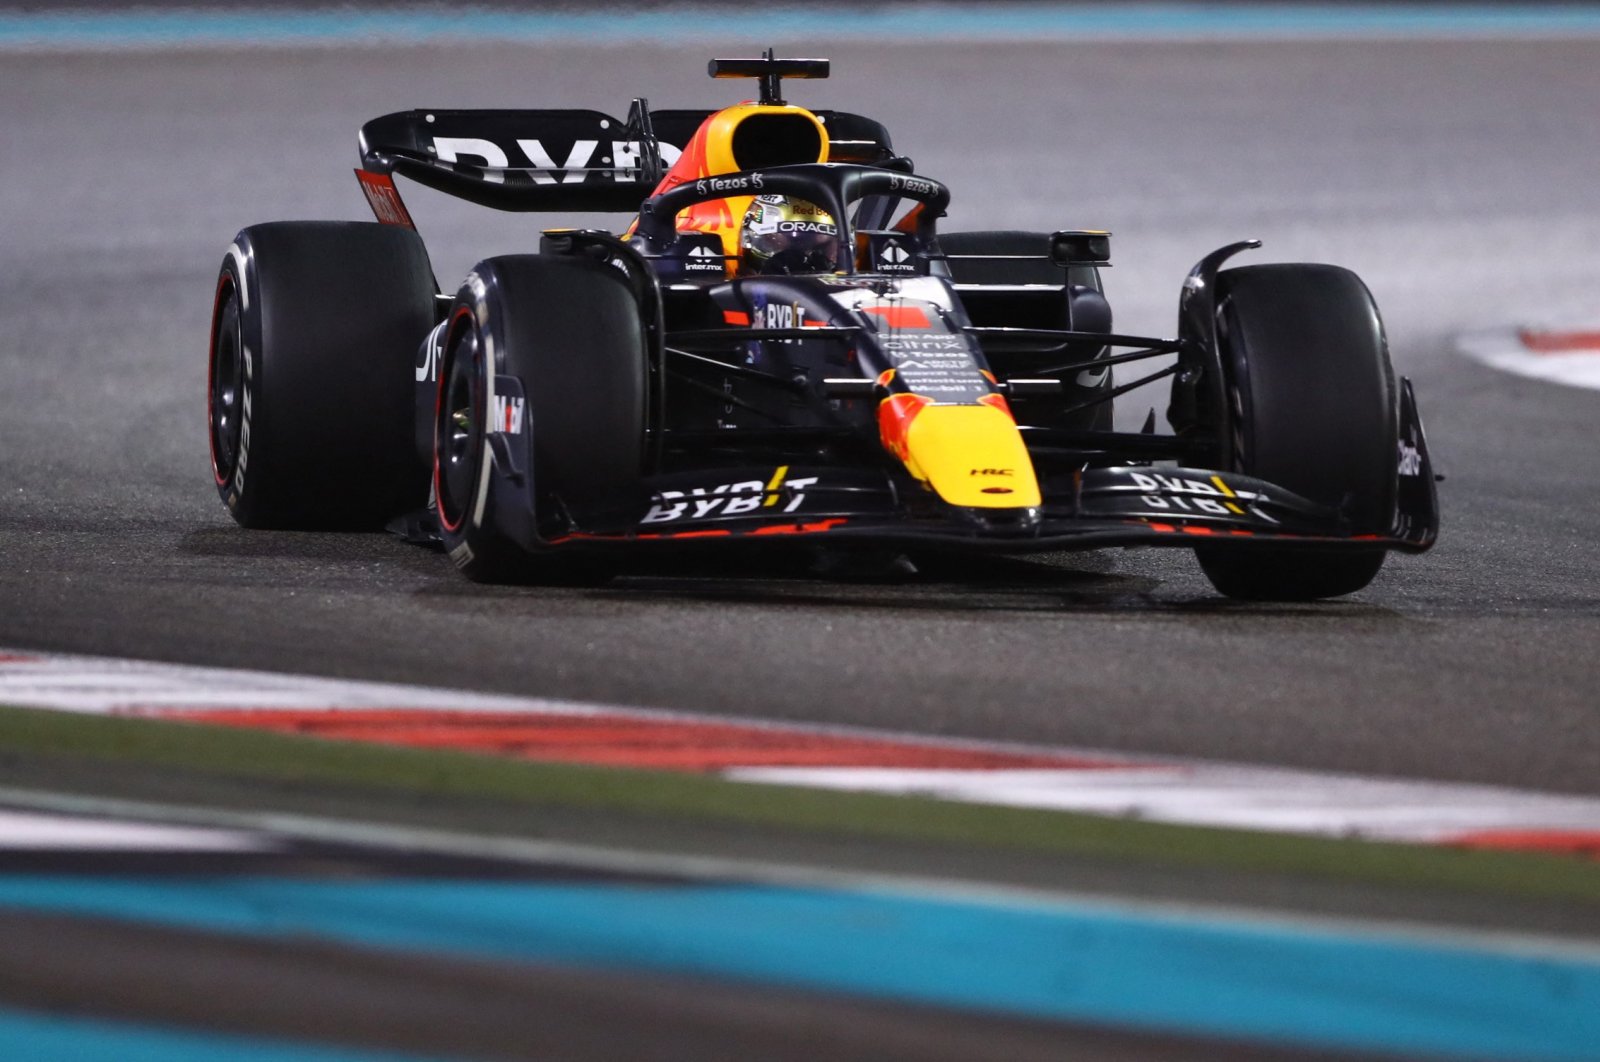 Red Bull&#039;s Max Verstappen in action during the Abu Dhabi Grand Prix race at the Yas Marina Circuit, Abu Dhabi, UAE, Nov. 20, 2022. (Reuters Photo)